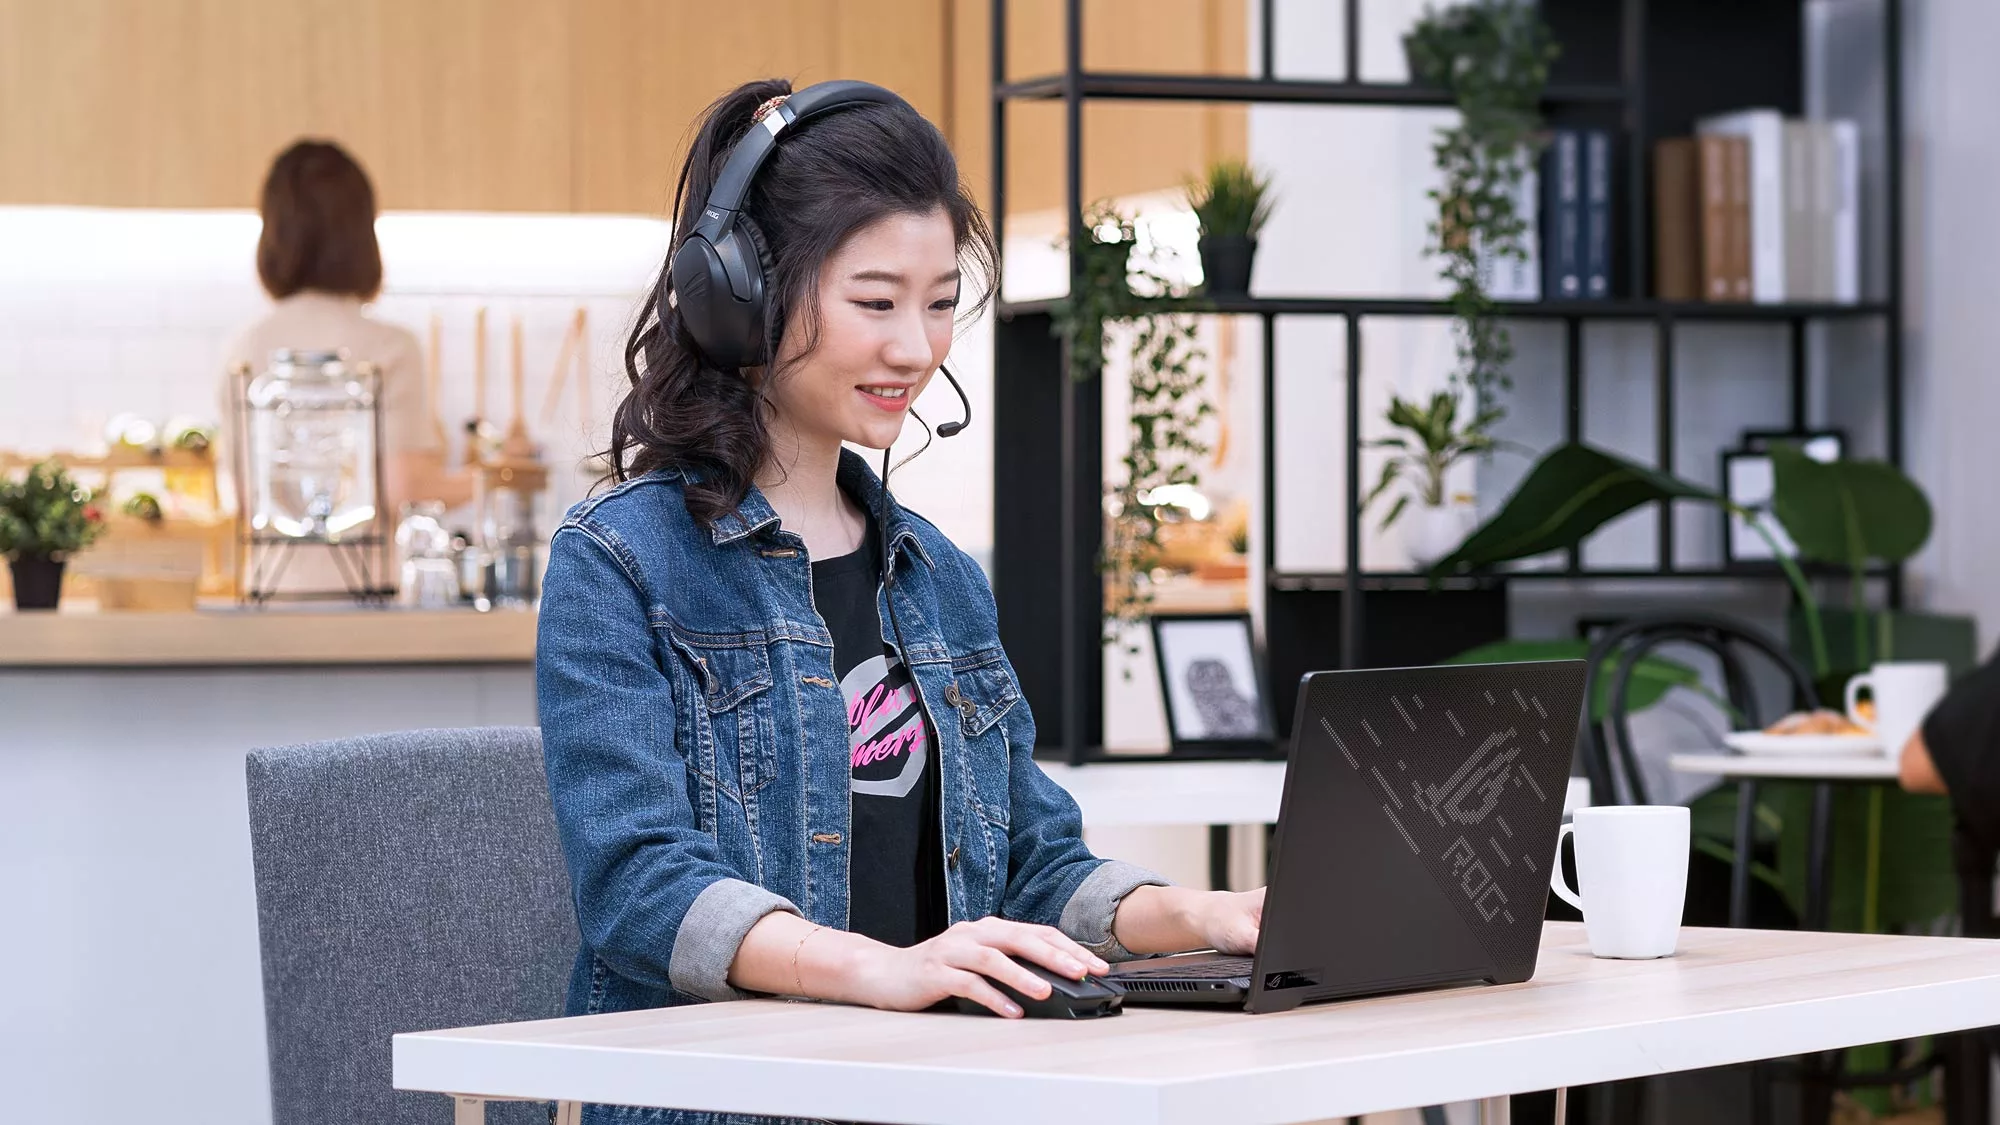 A smiling woman sitting at a table with an ROG laptop wearing the ROG Strix Go headset.